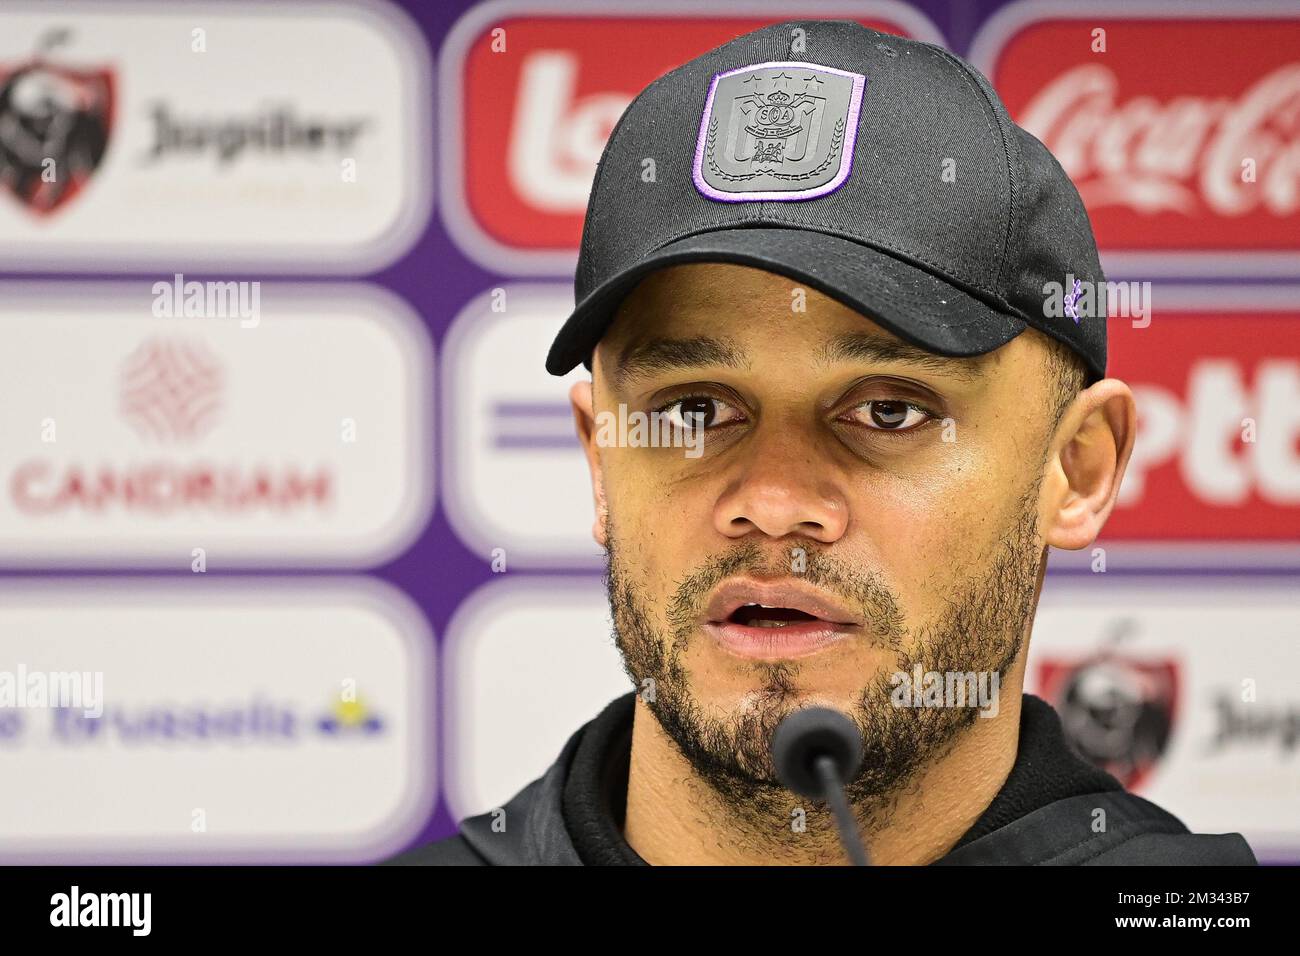 Anderlecht's head coach Vincent Kompany pictured during a press conference of Belgian soccer team RSC Anderlecht in Brussels, Wednesday 09 December 2020. On Friday Anderlecht is playing the leader, Genk, on the sixteenth day of the the 'Jupiler Pro League' Belgian soccer championship. BELGA PHOTO LAURIE DIEFFEMBACQ Stock Photo